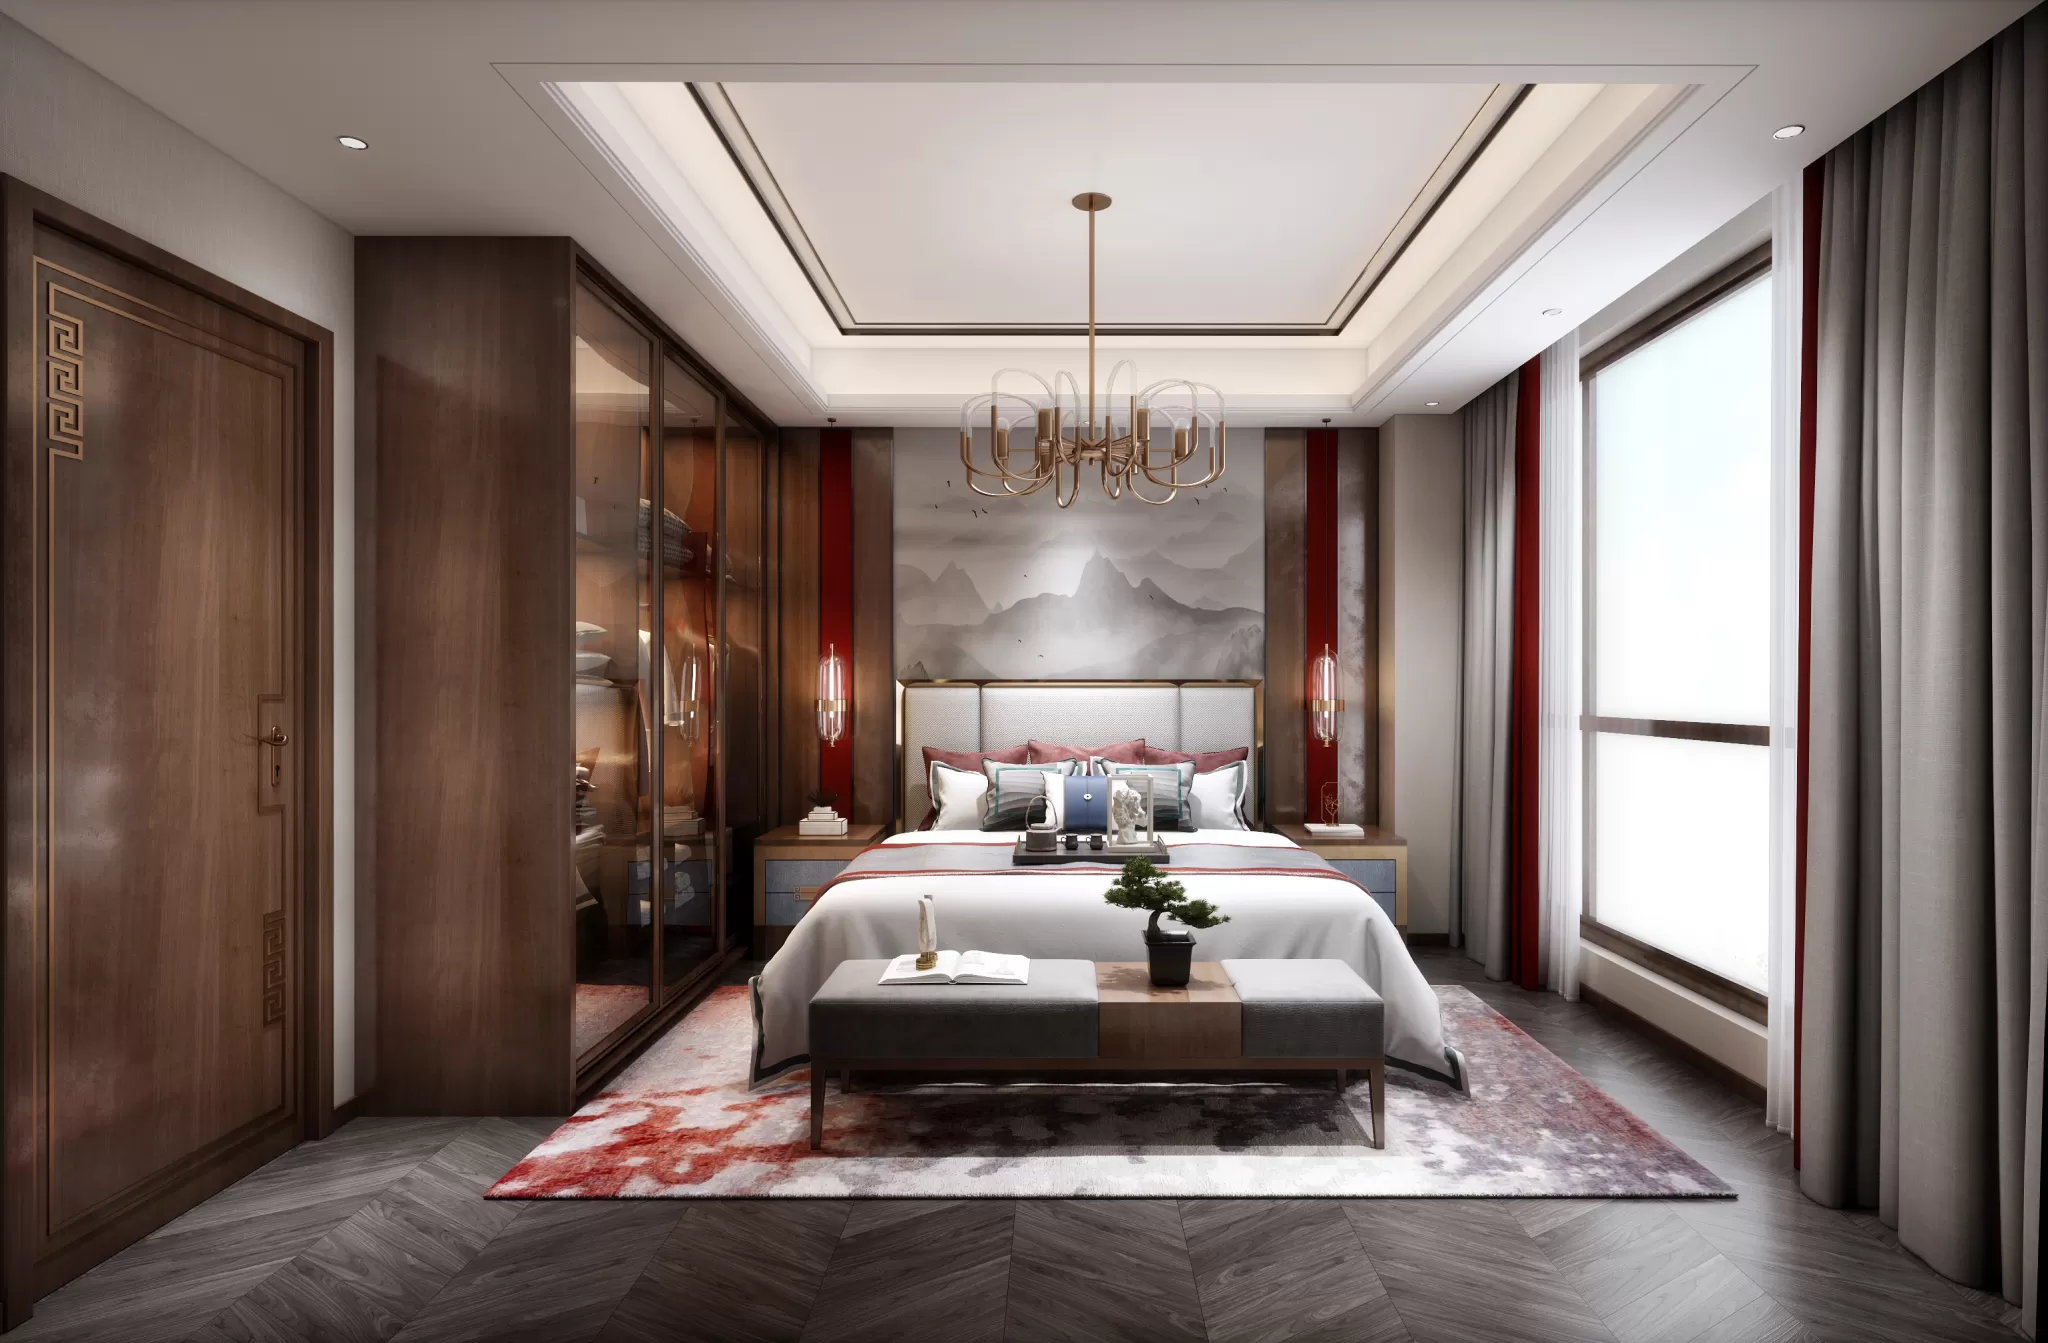 DESMOD INTERIOR 2021 (VRAY)/5. BEDROOM – 2. CHINESE STYLES – 159